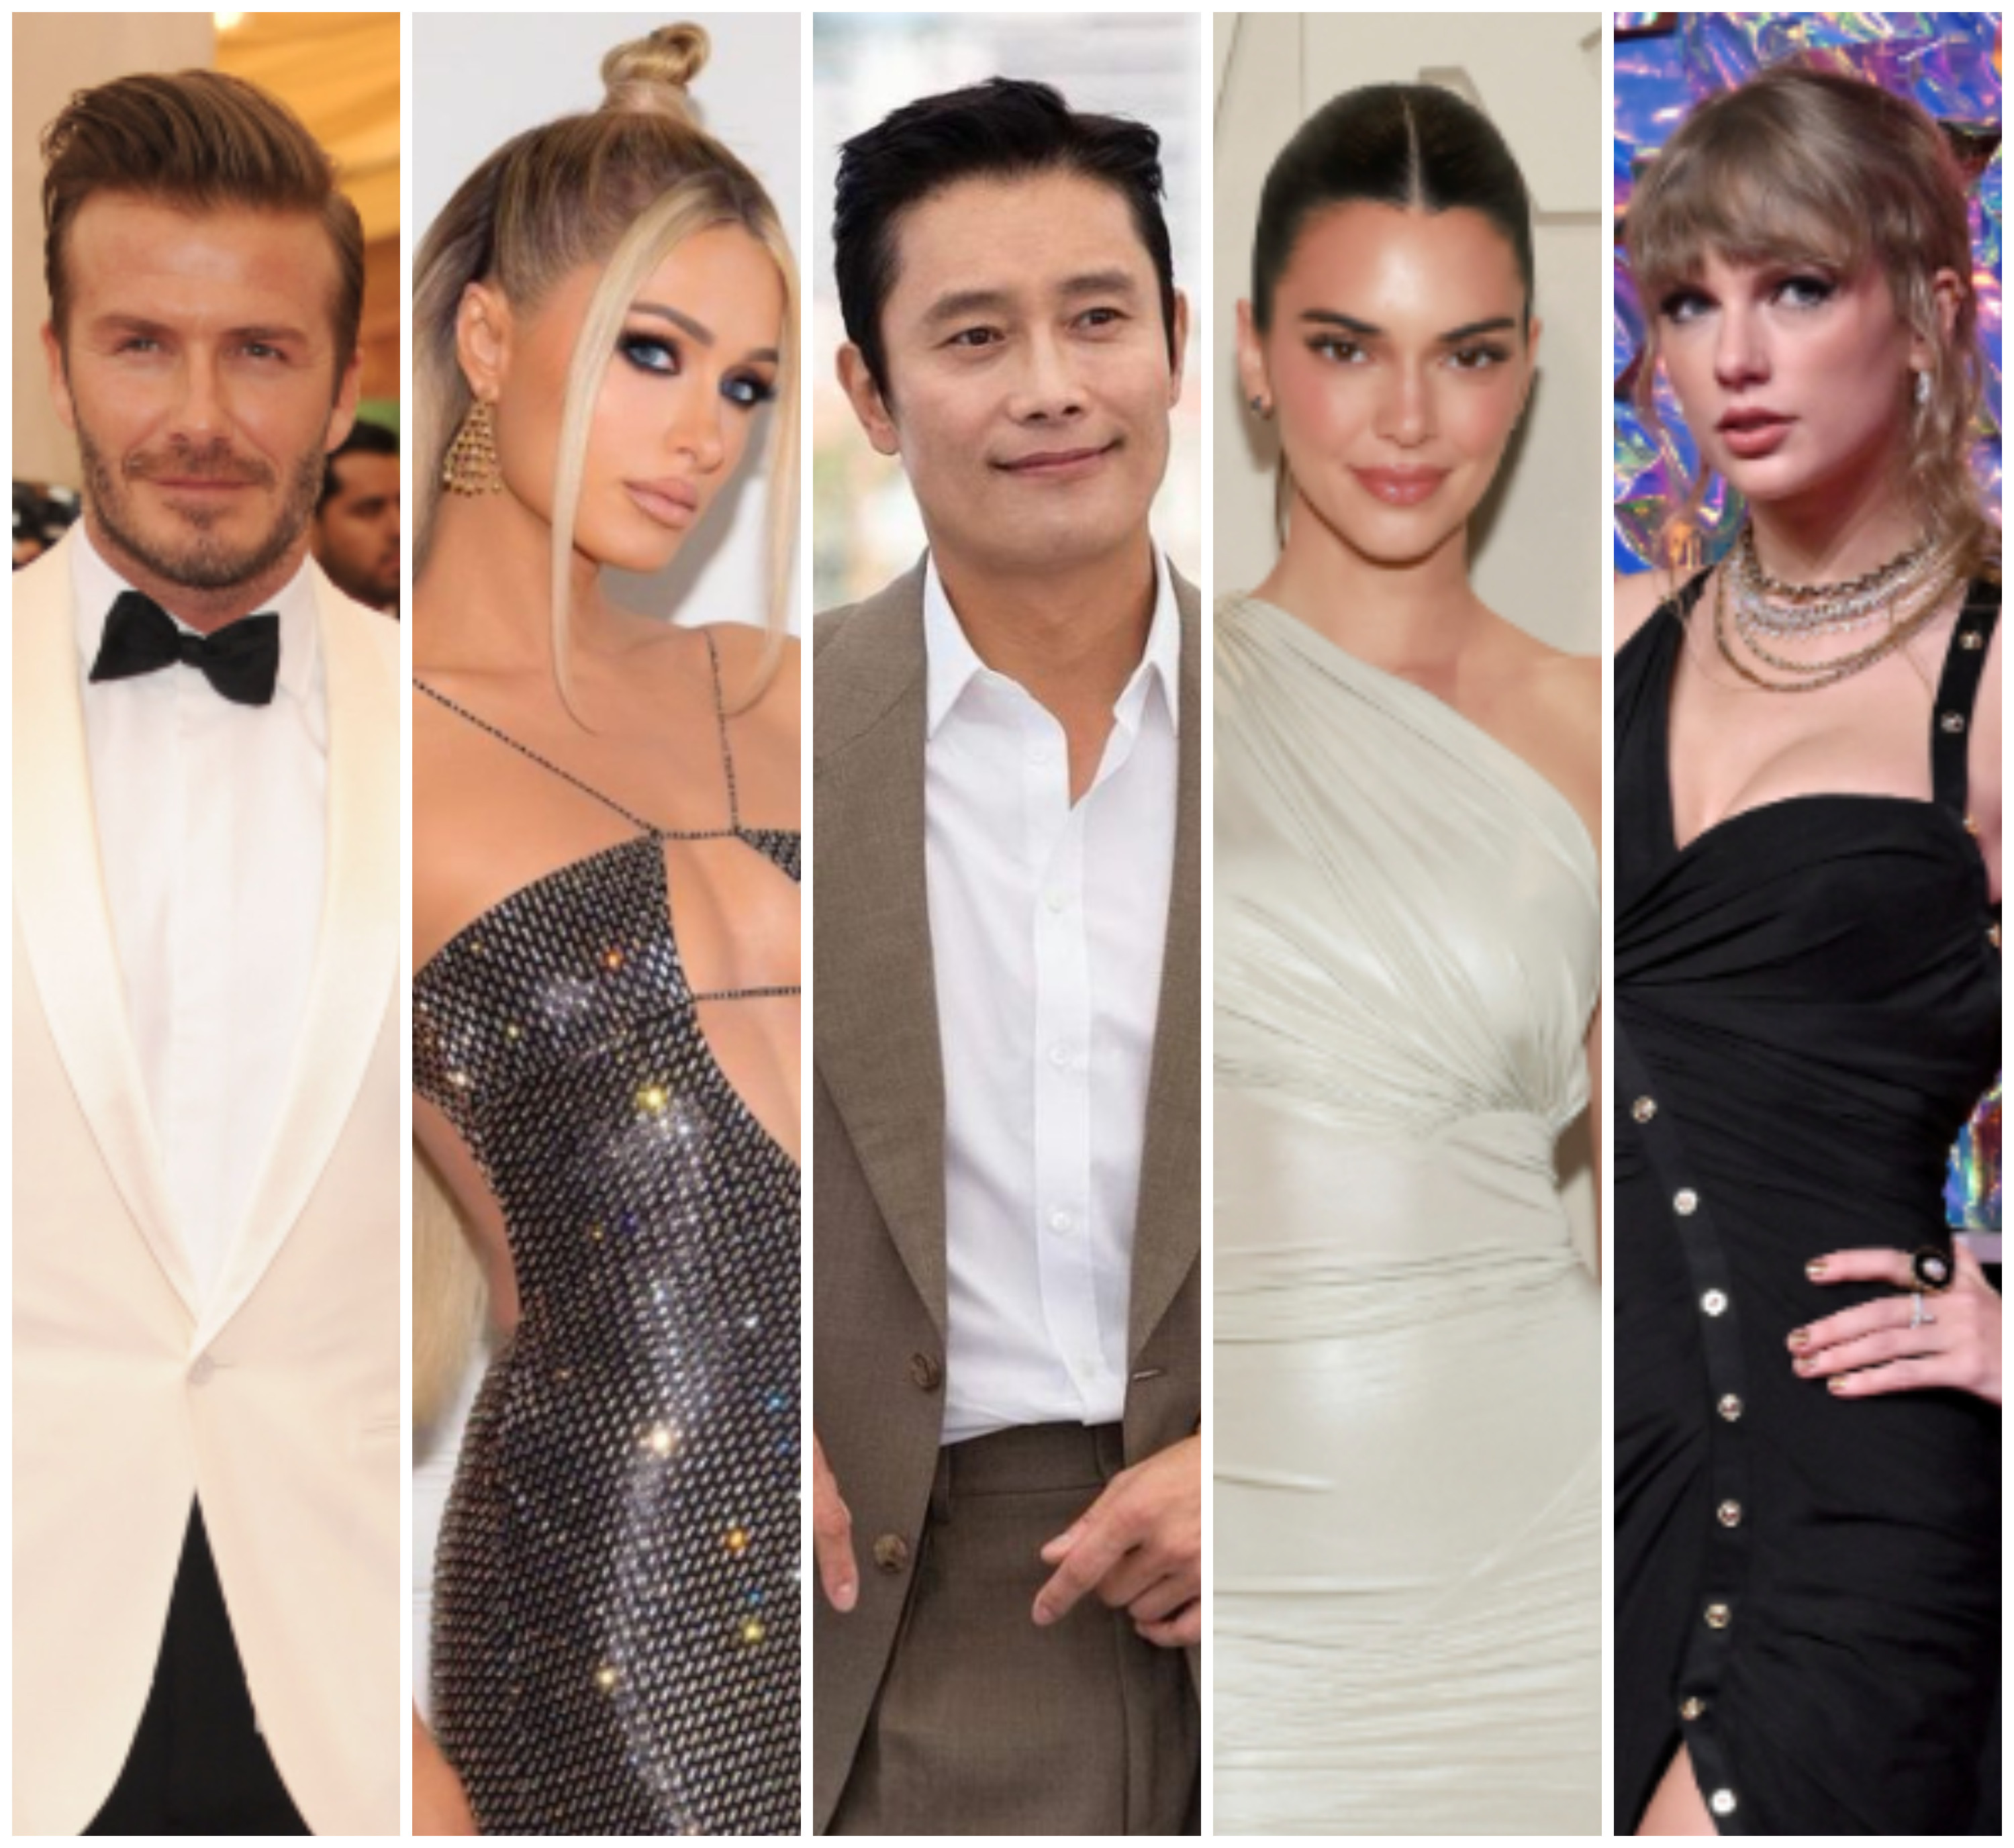 David Beckham, Paris Hilton, Lee Byung-hun, Kendall Jenner and Taylor Swift have all had unwanted intruders in their homes. Photos: WireImage; @parishilton, @byunghun0712/Instagram; Getty Images; FilmMagic